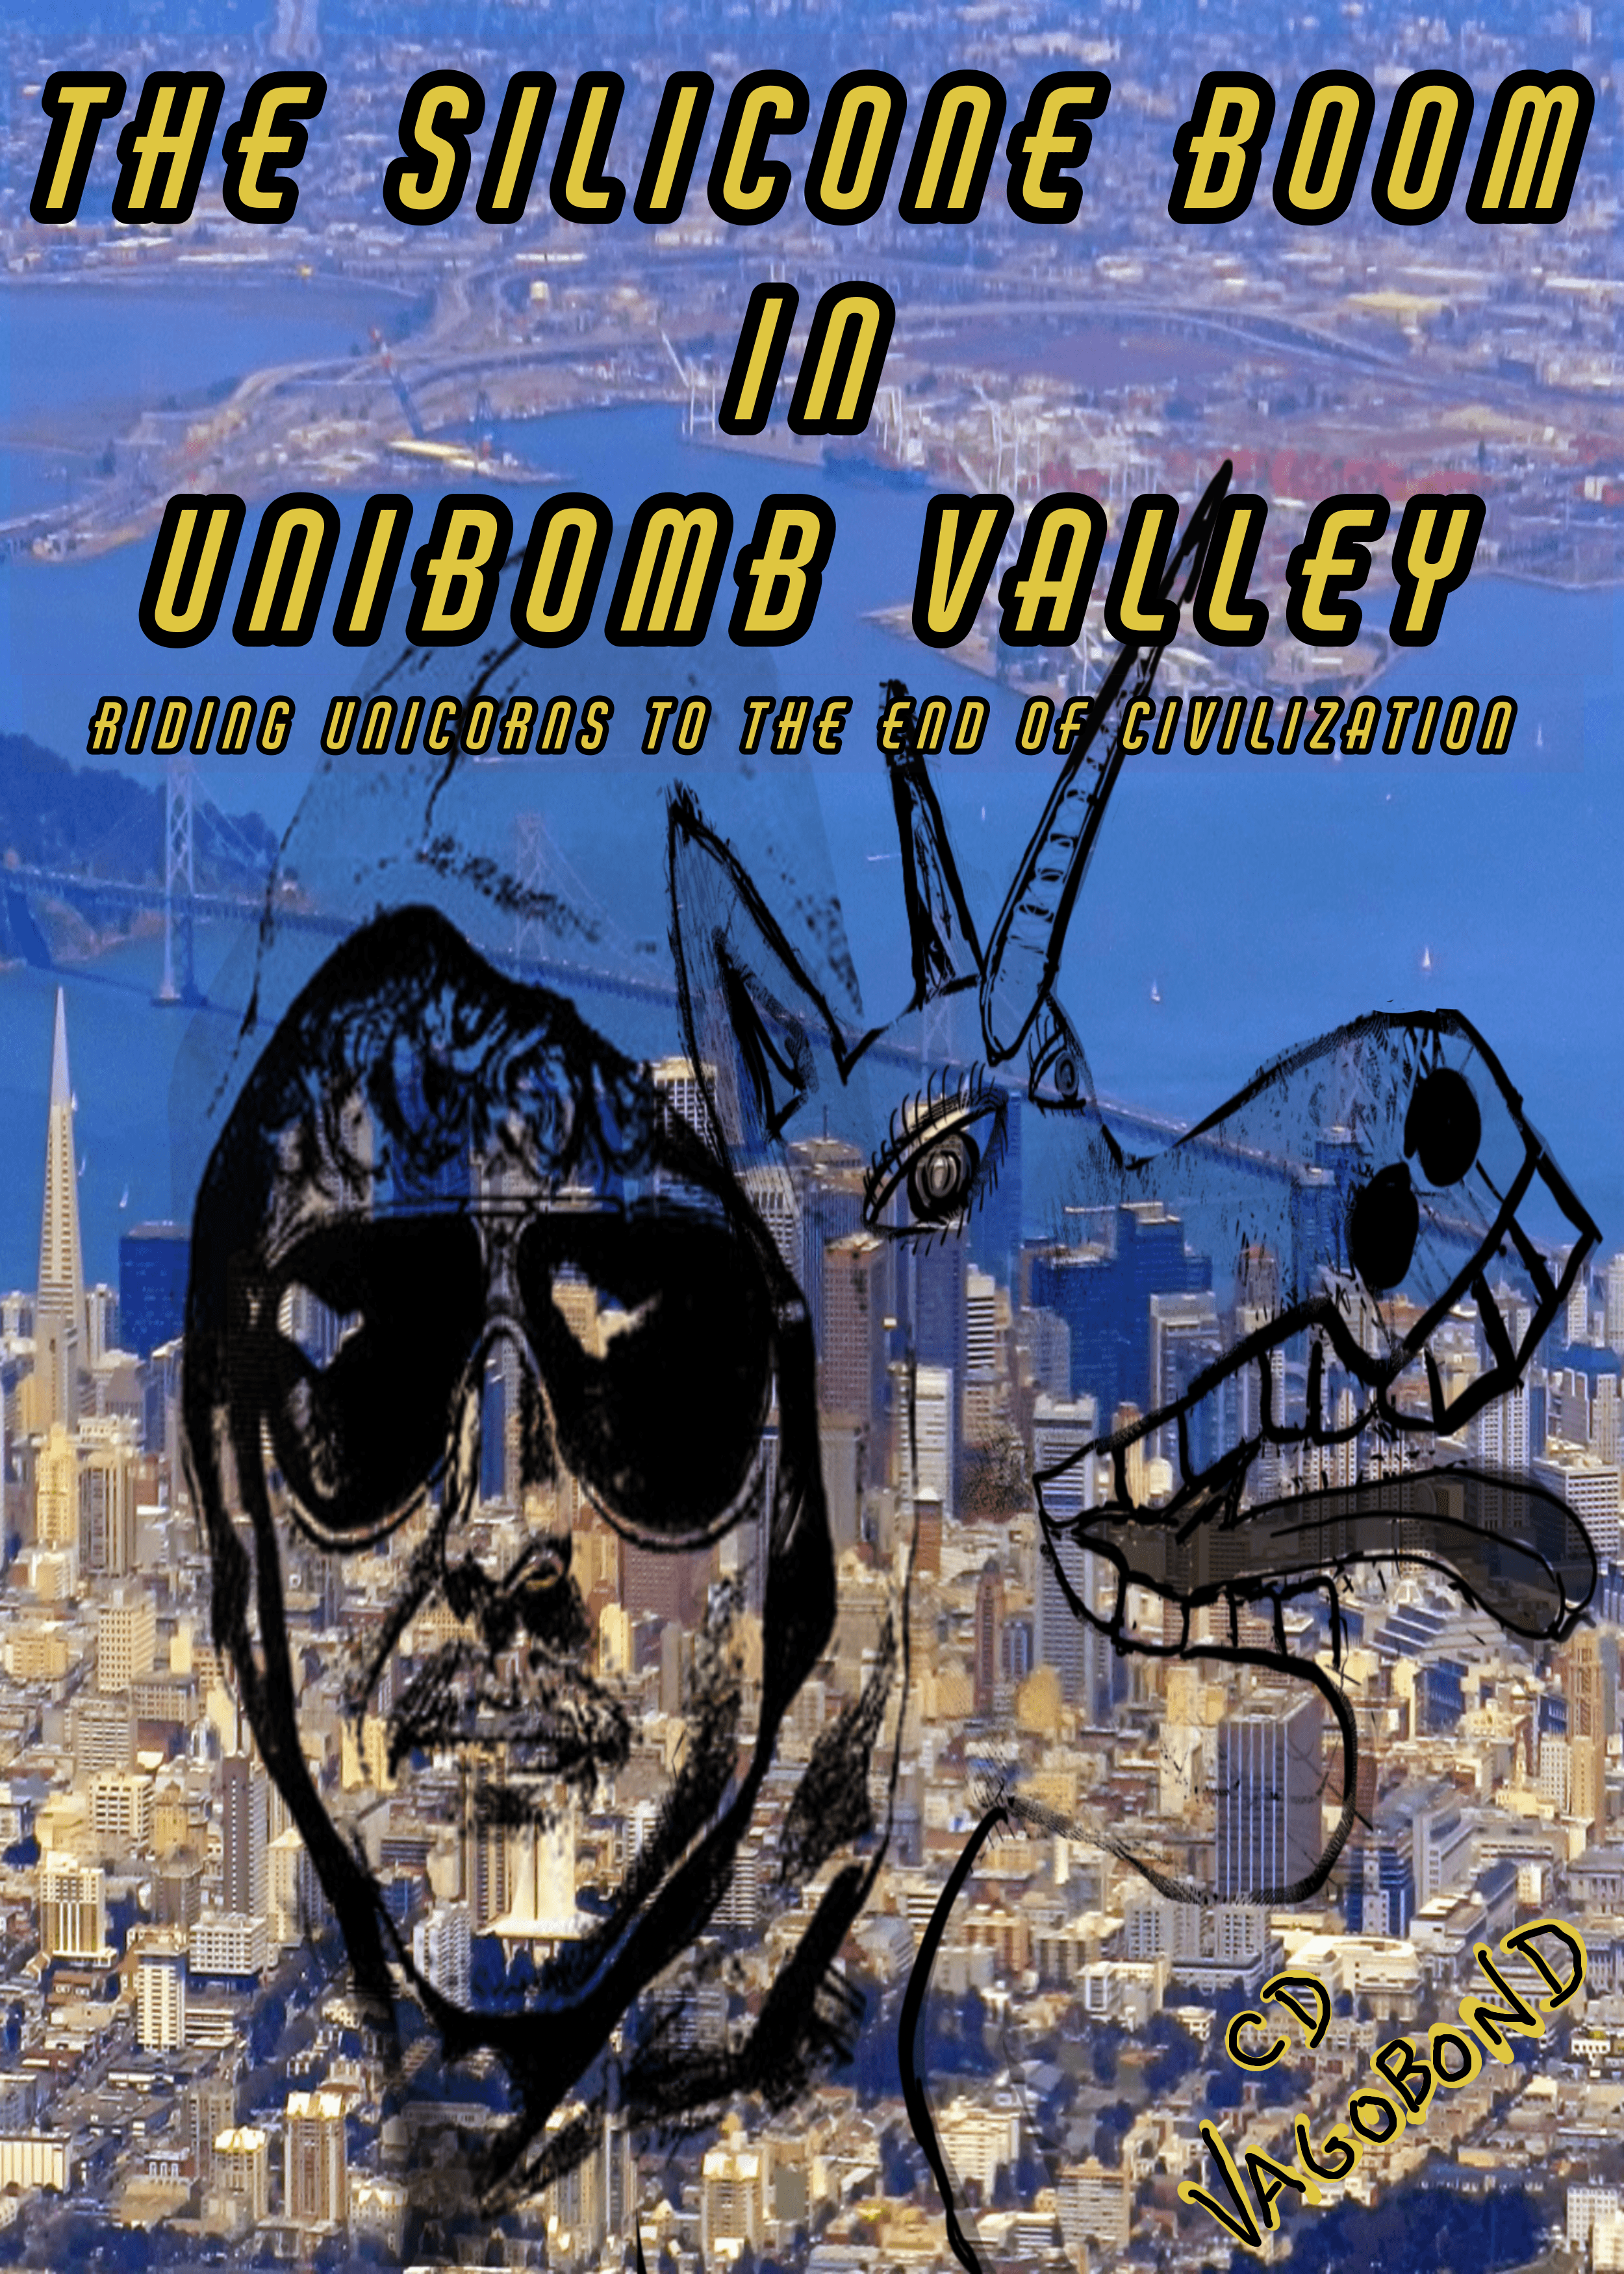 The Silicone Boom in Unibomb Valley: Riding Unicorns to the End of Civilization